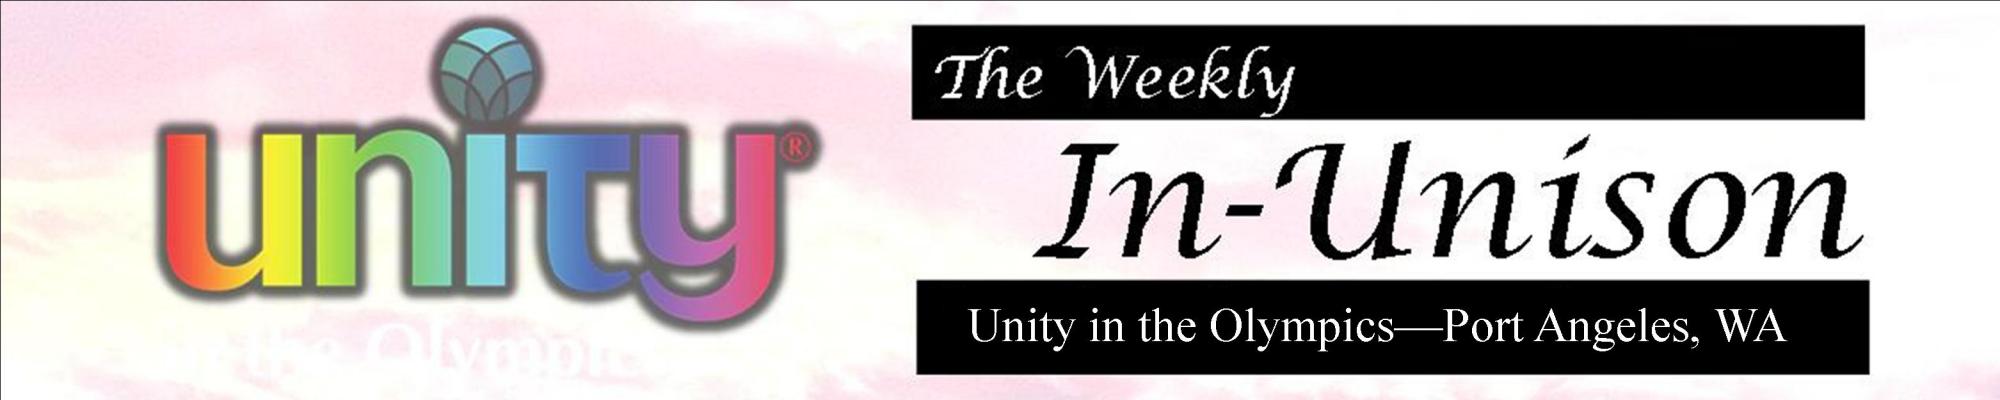 The Weekly IN-UNISON May 15, 2024 Edition